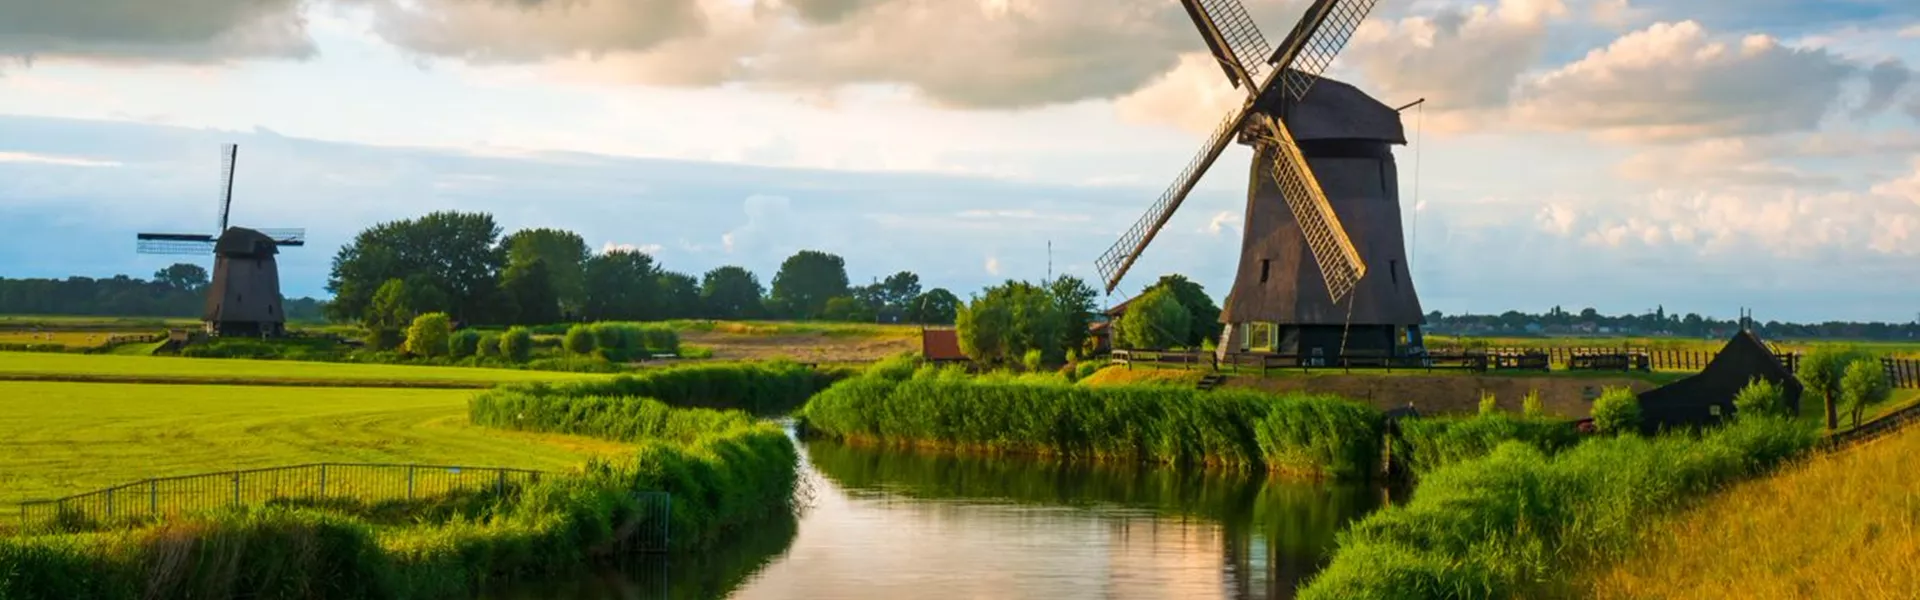 Windmills and a river, Netherlands.